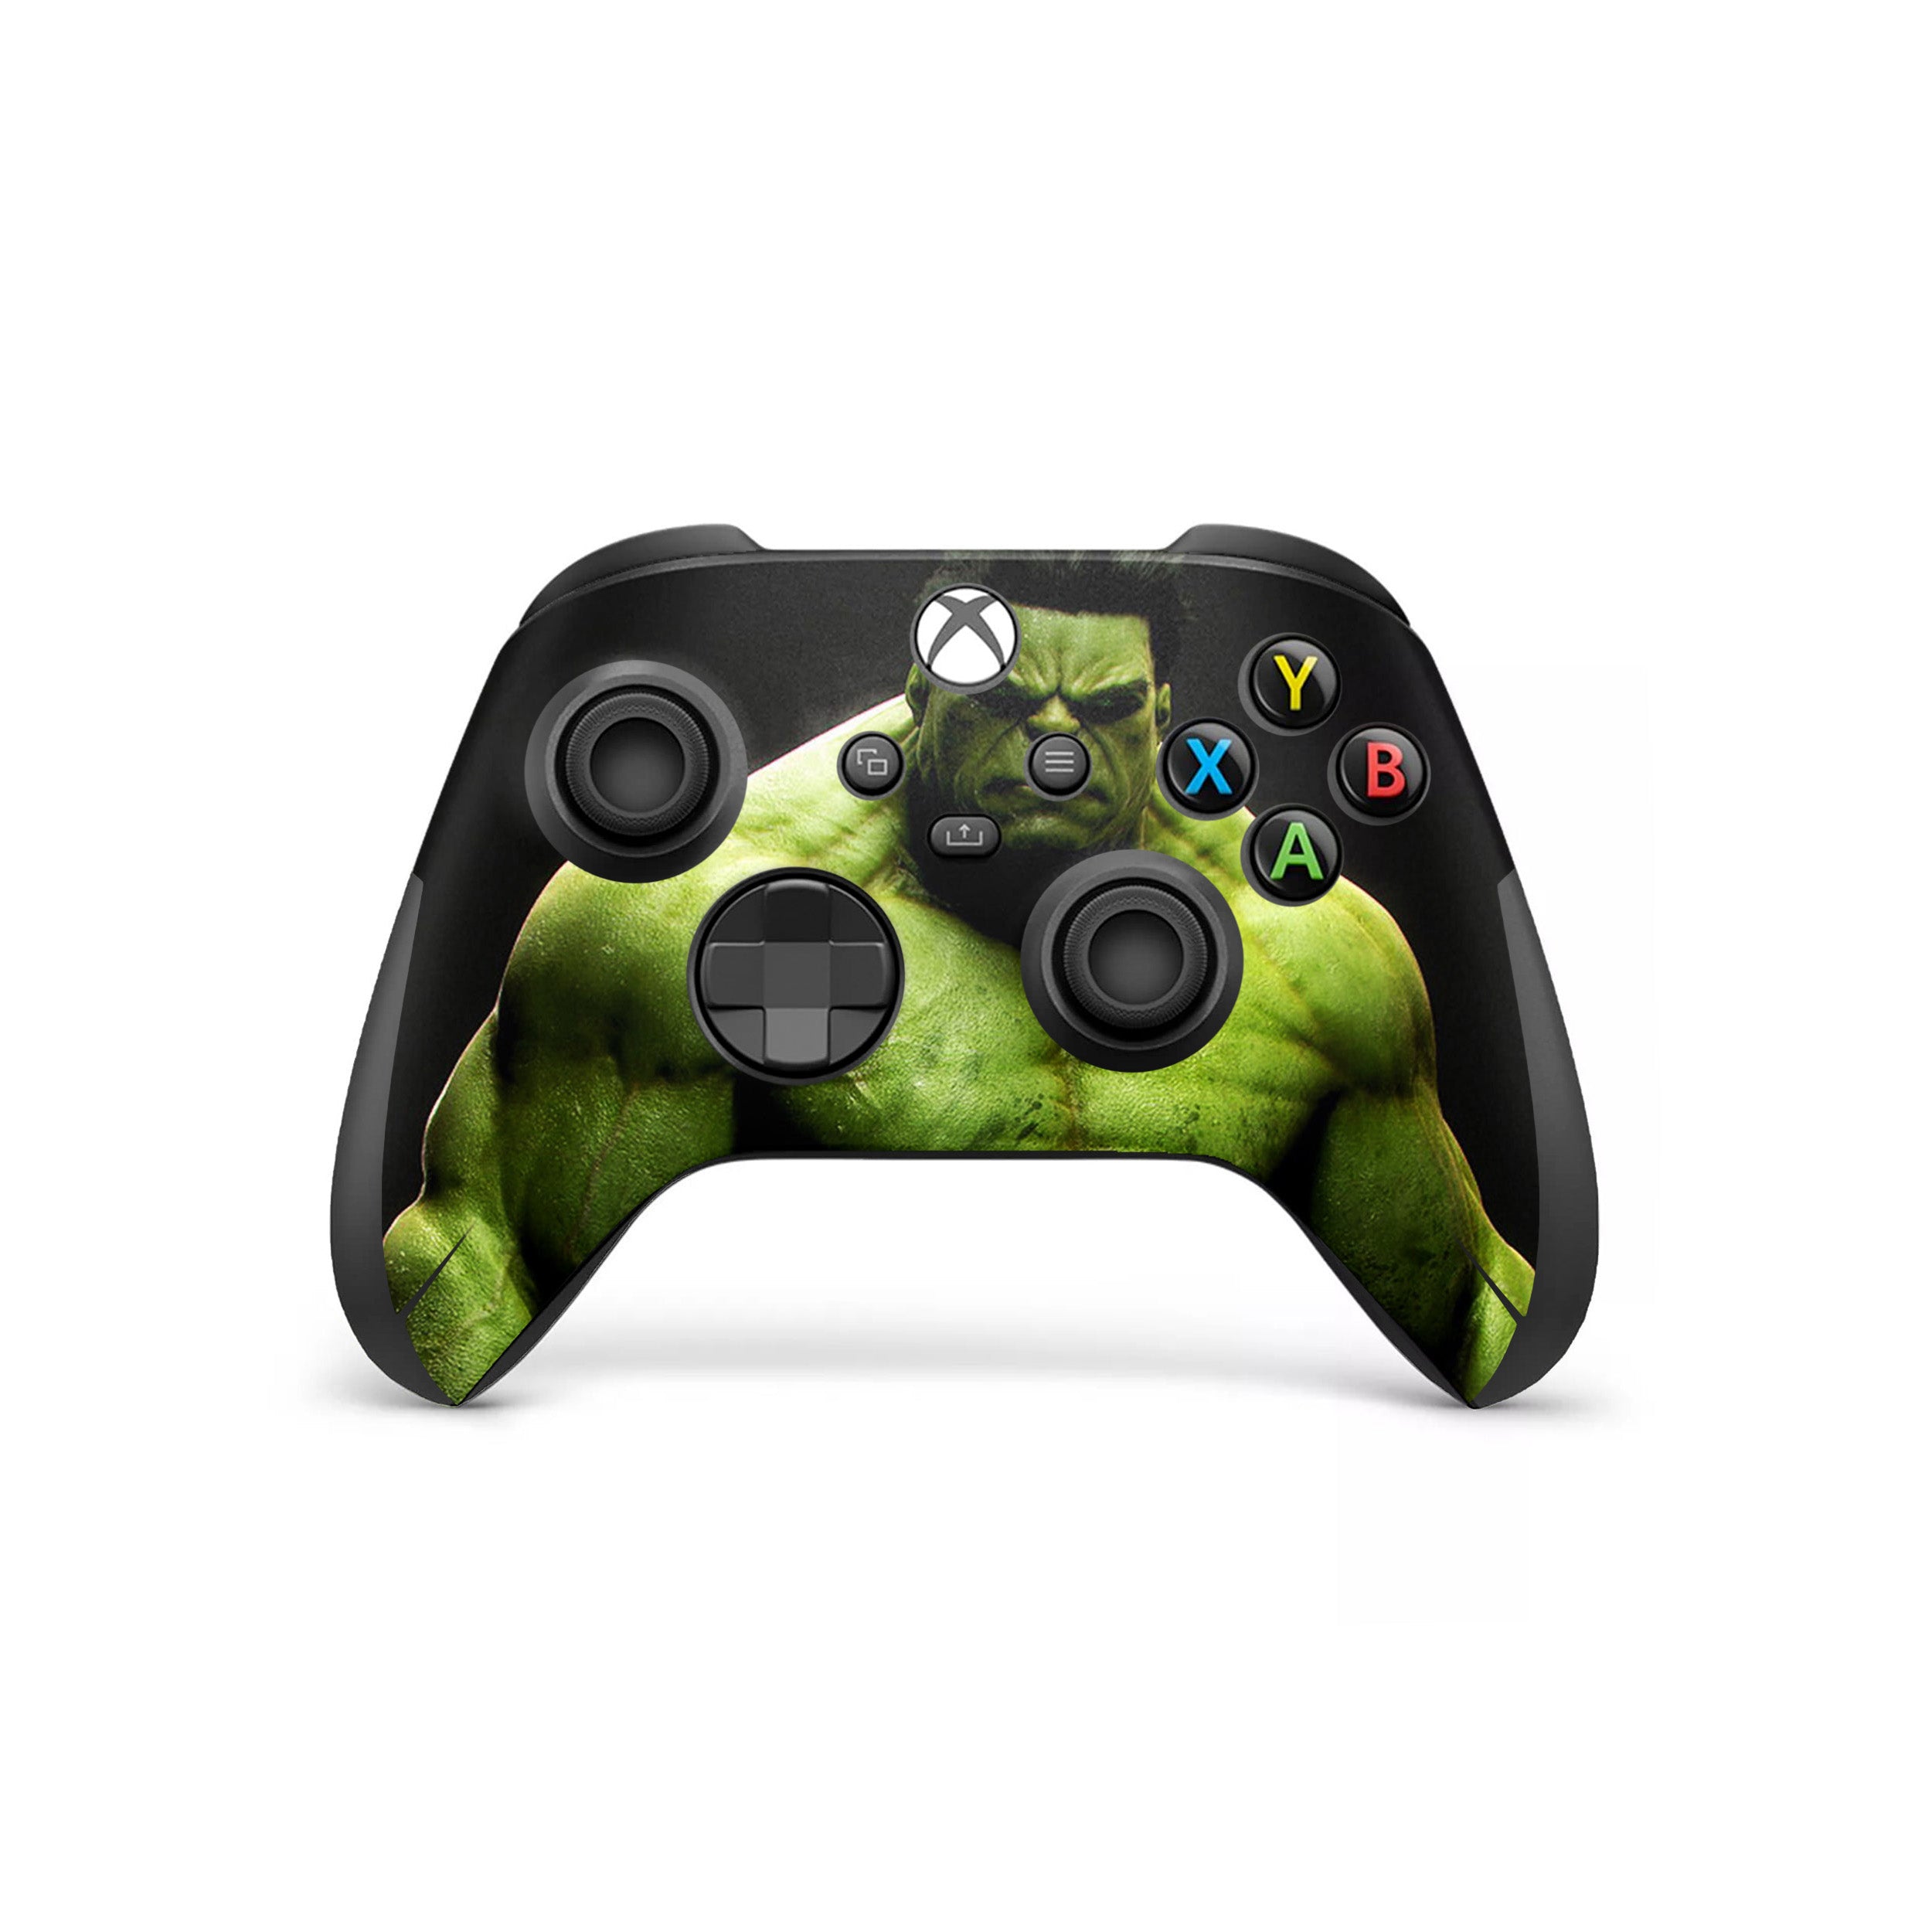 A video game skin featuring a Marvel Comics Hulk design for the Xbox Wireless Controller.